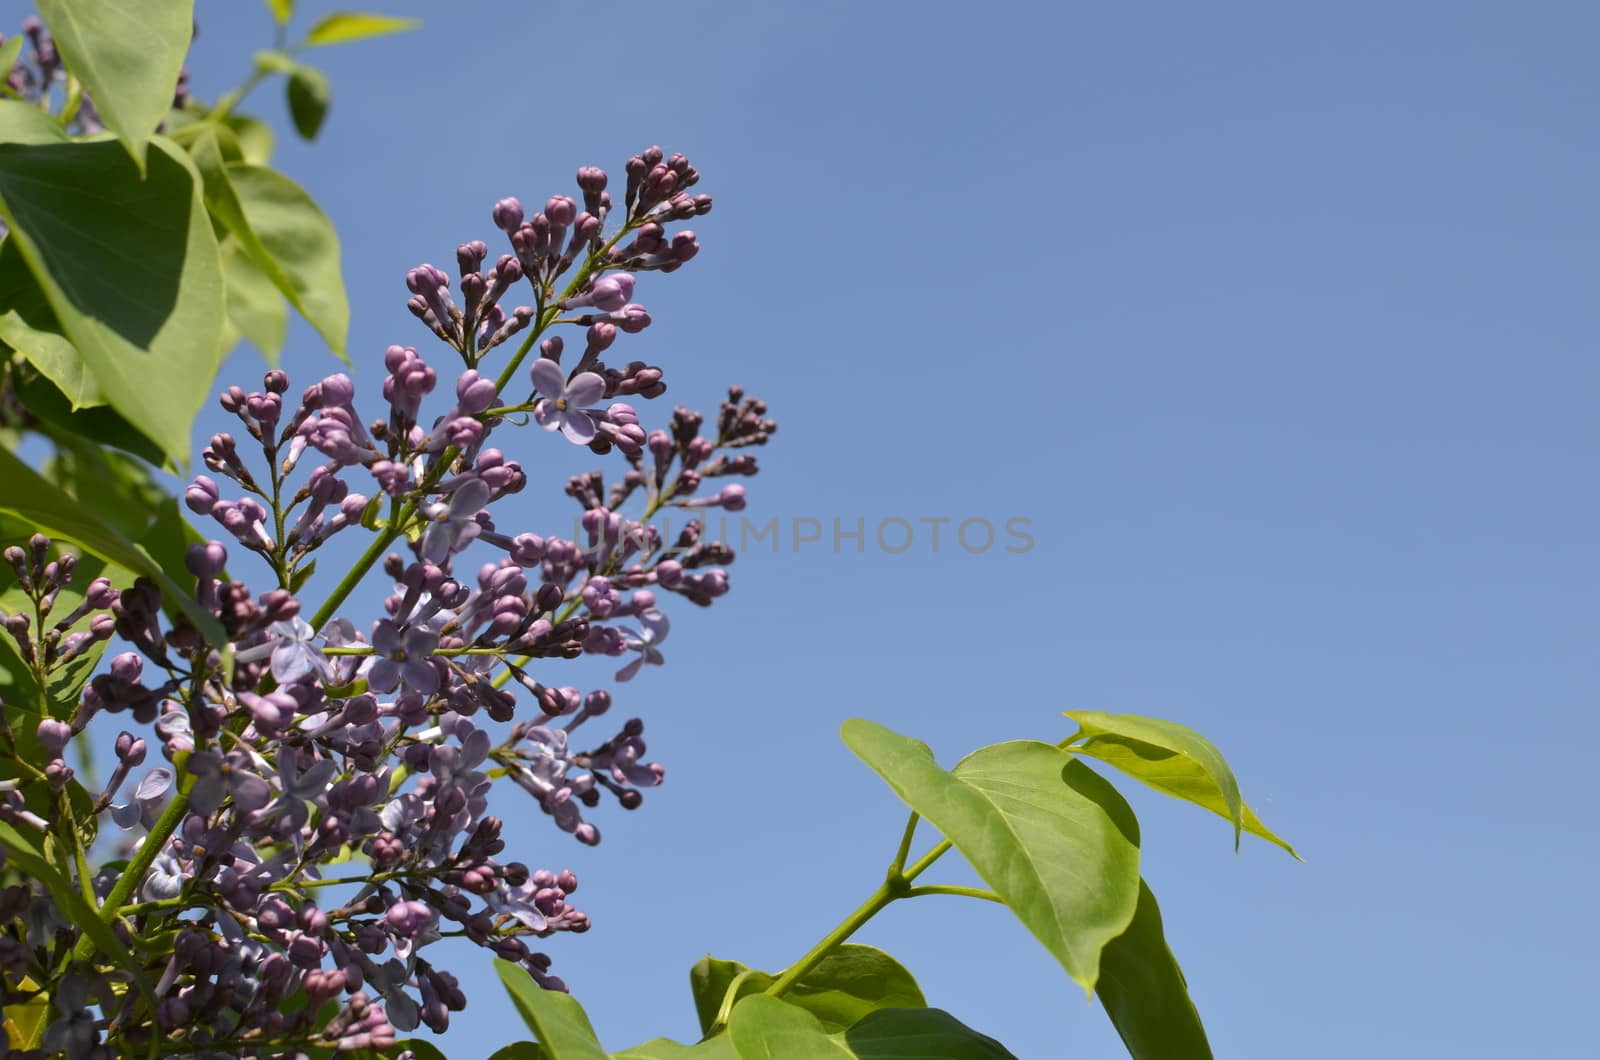 Violet Flower with Green Leaves on Blue Sky by fstockluk